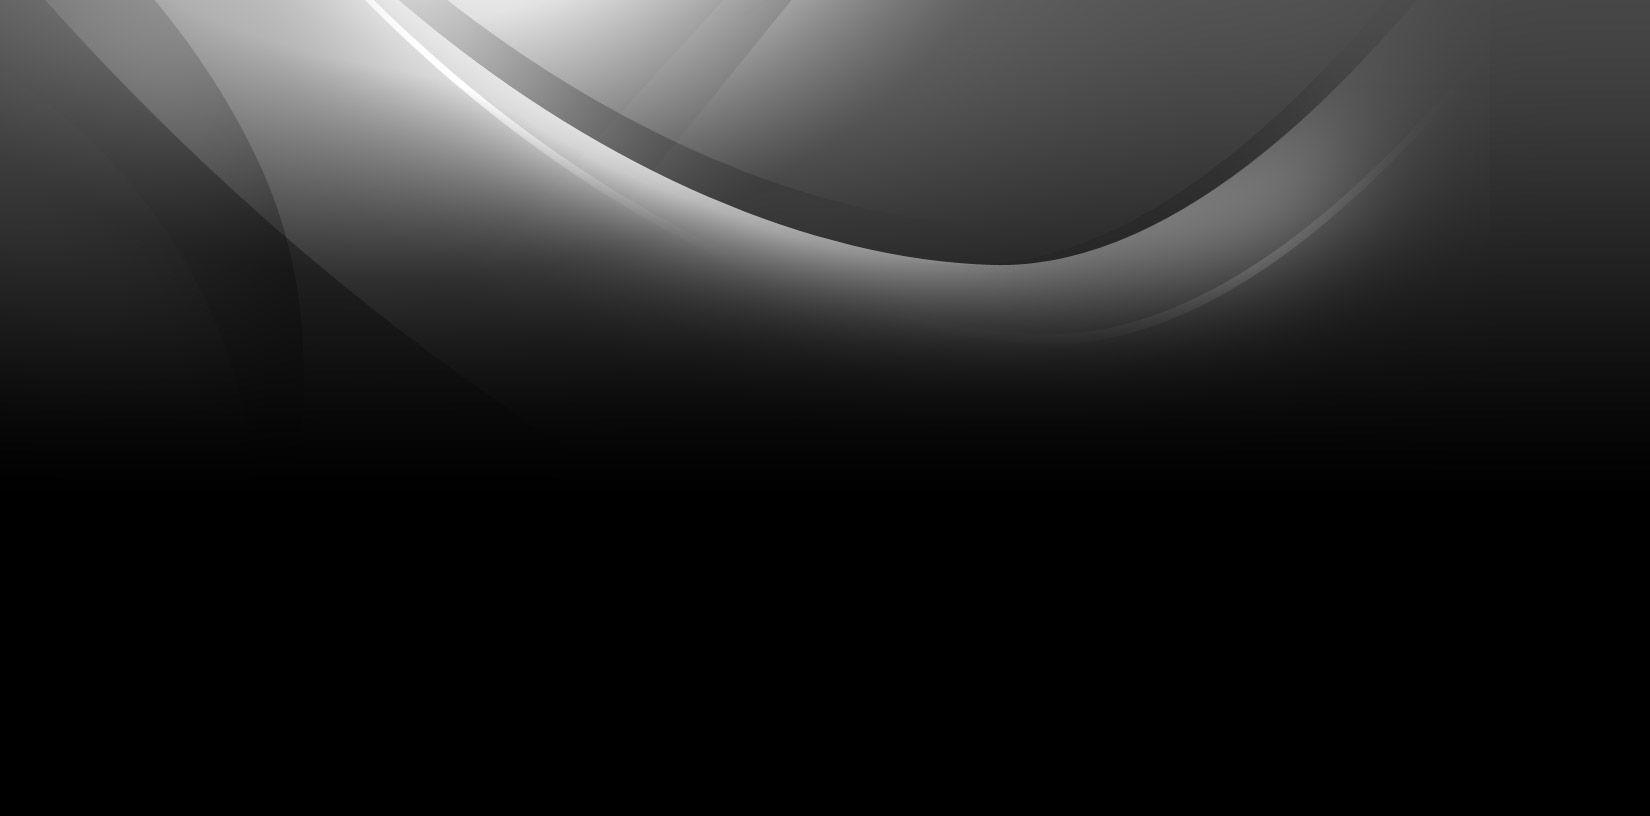 Wallpaper For > Black And White Gradient Background